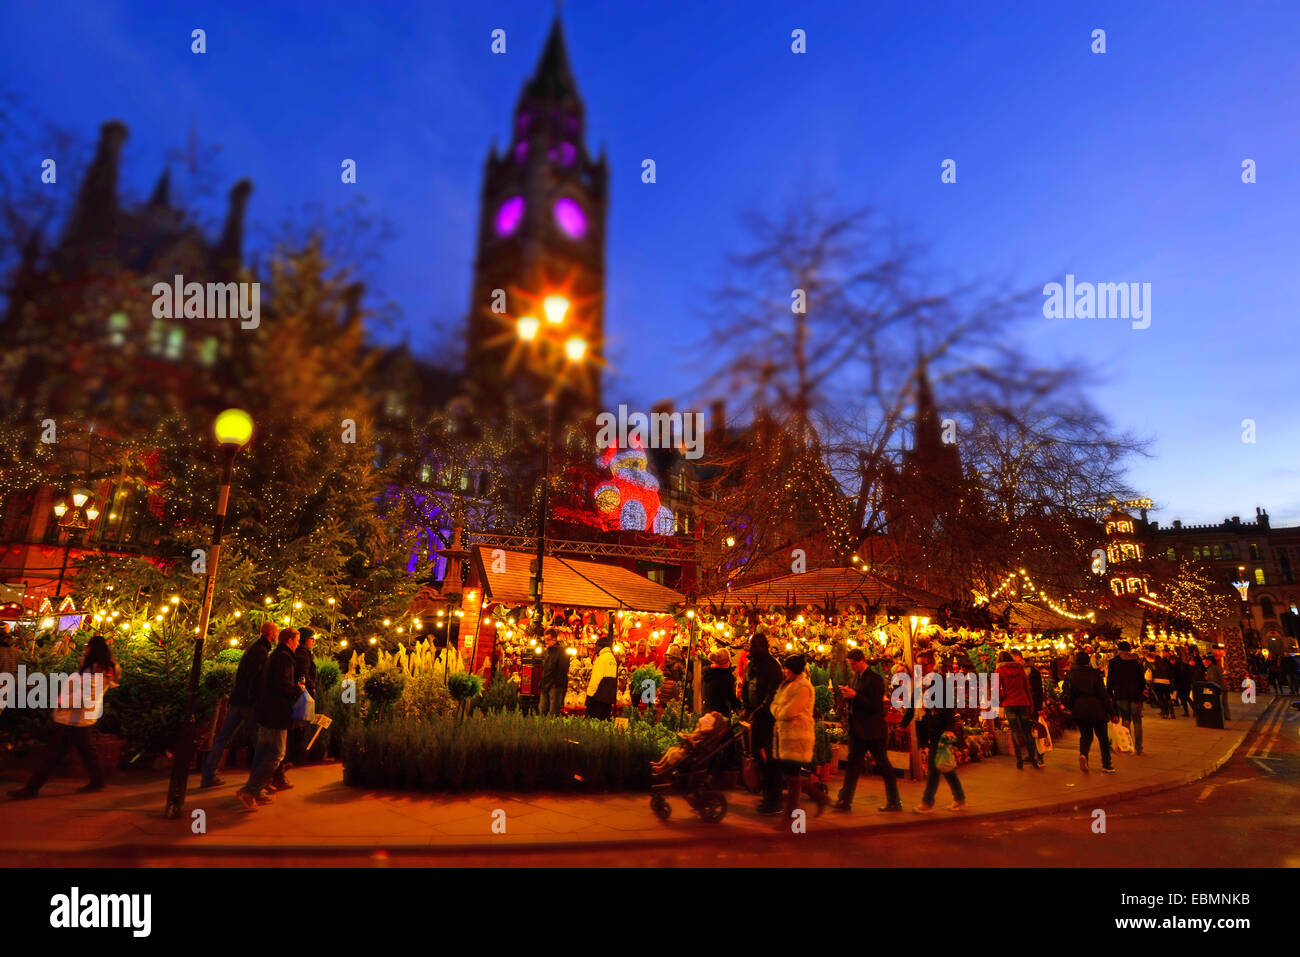 Christmas Market in front of The Town Hall in Albert Square, Manchester, England. Stock Photo